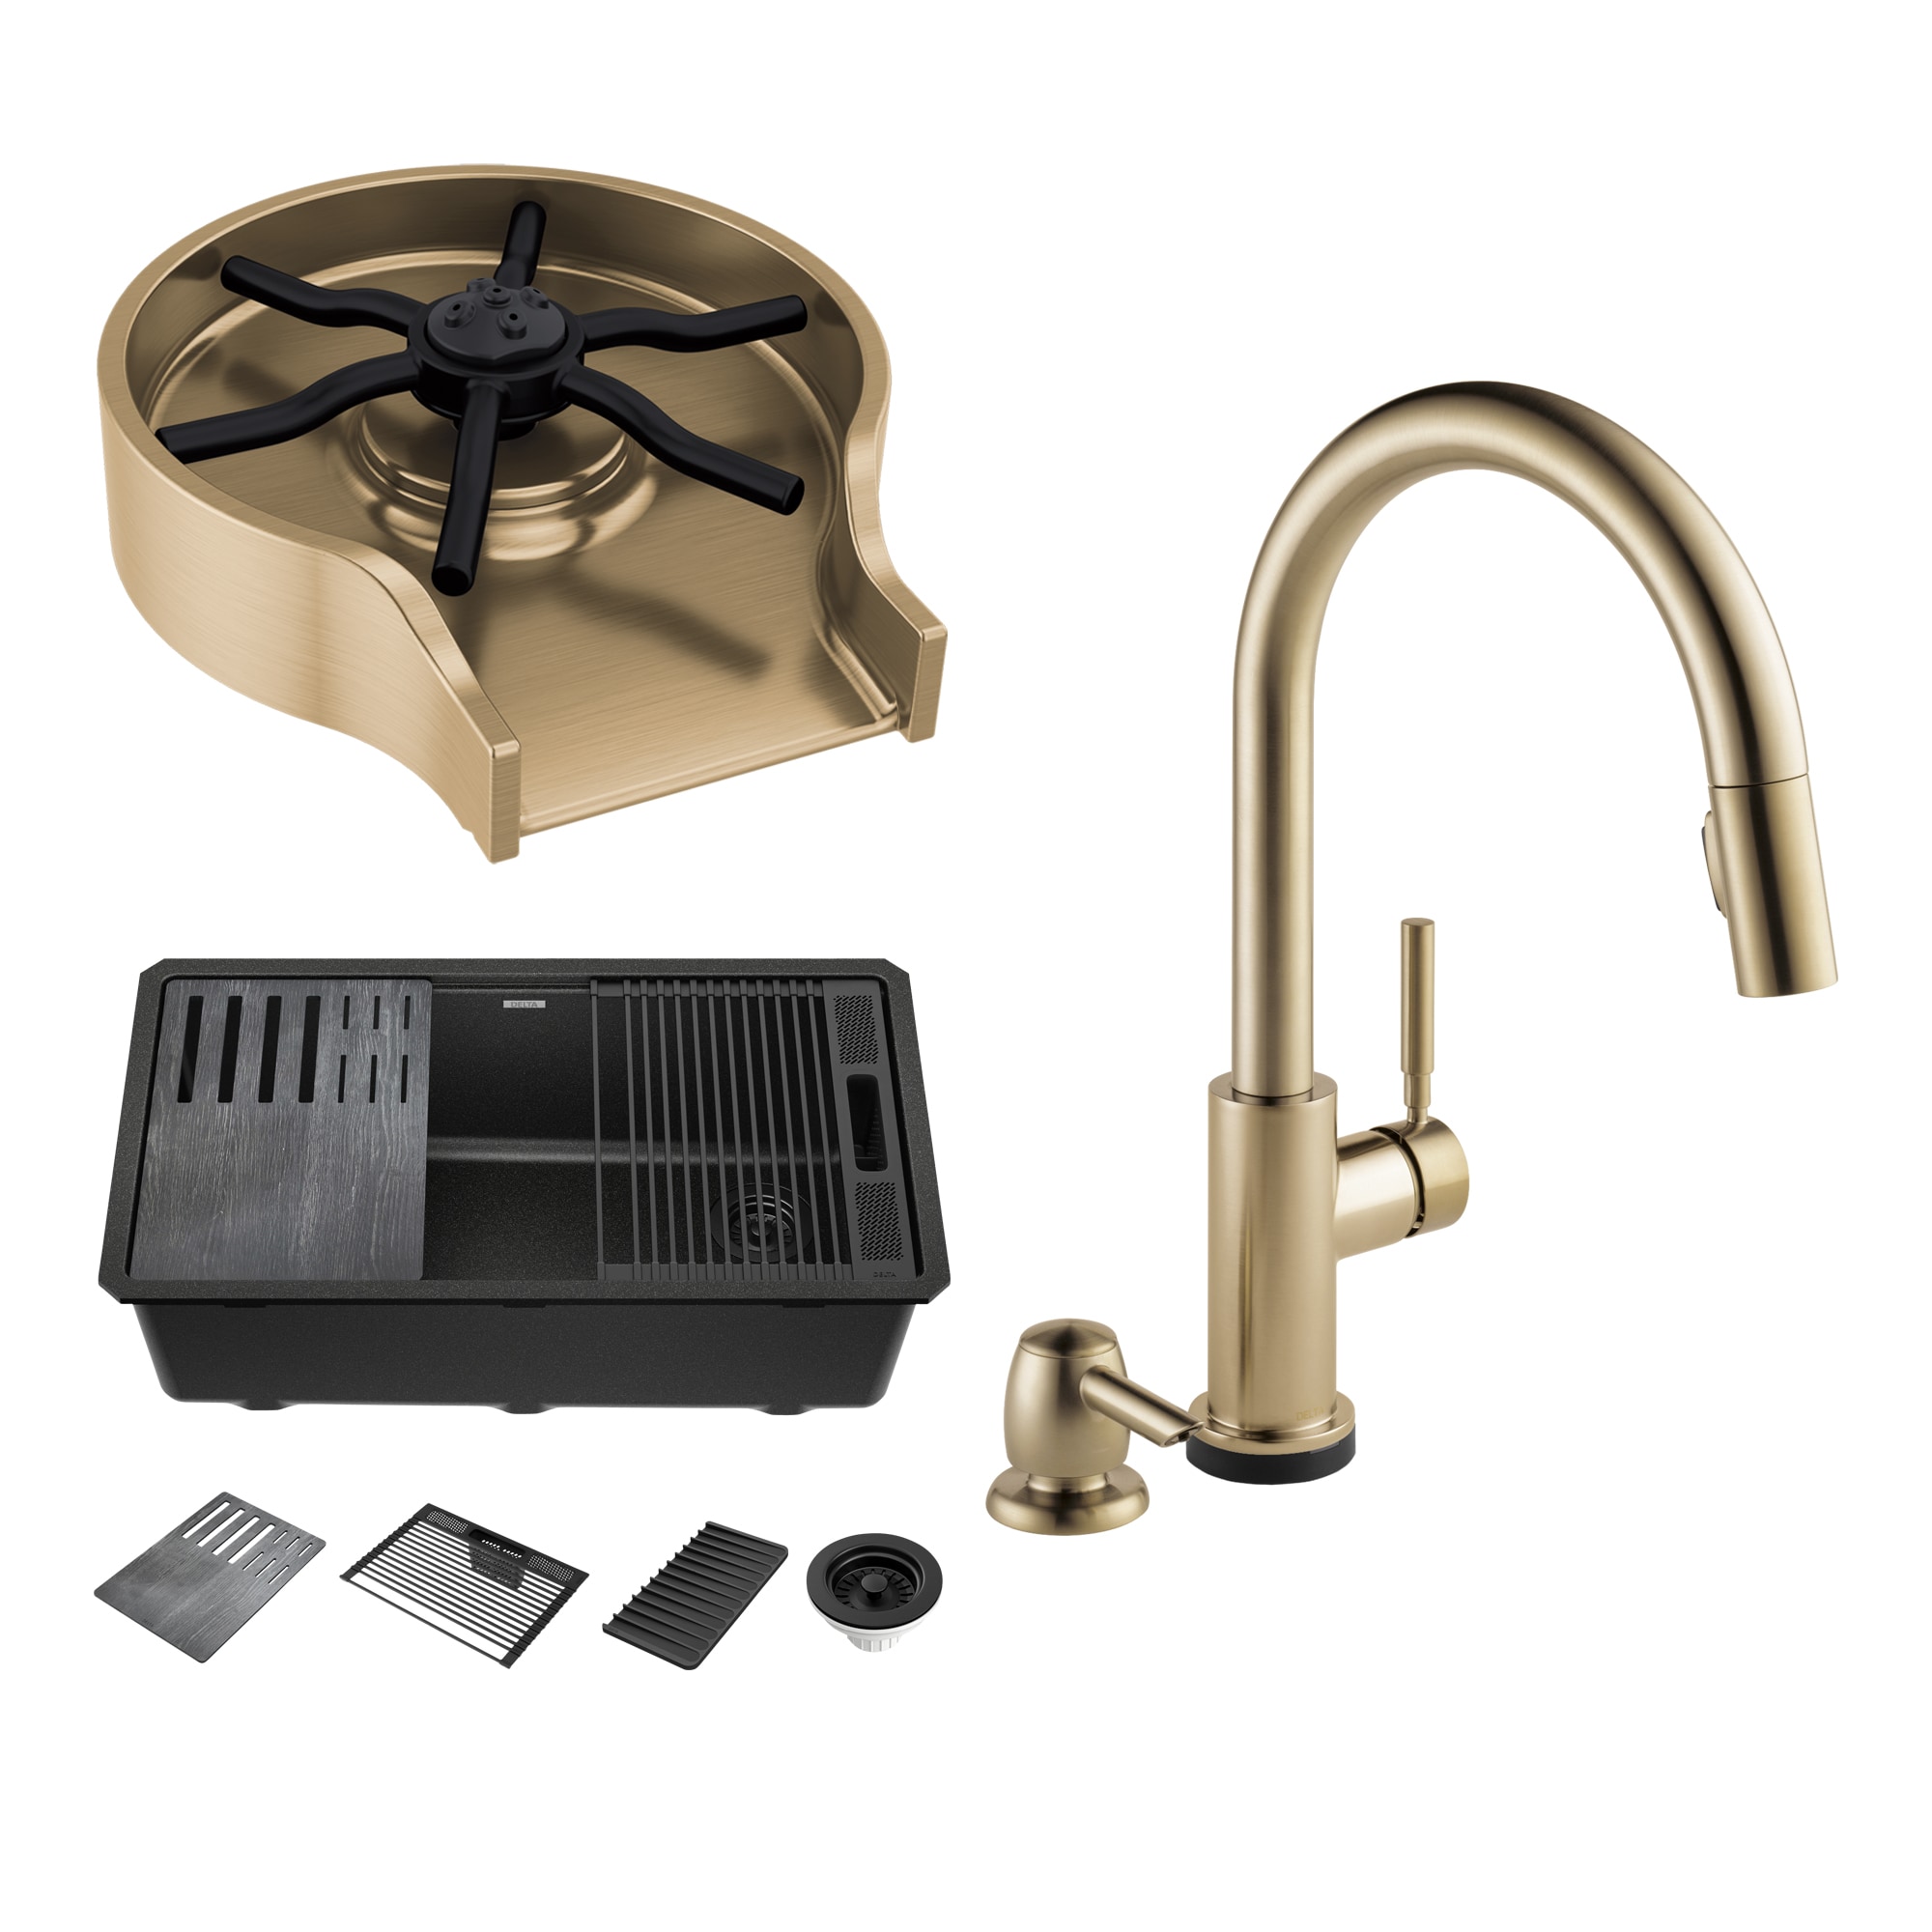 Shop Delta Trask with Tempsense Spotshield Stainless Single Handle  Pull-Down Kitchen Faucet Collection at